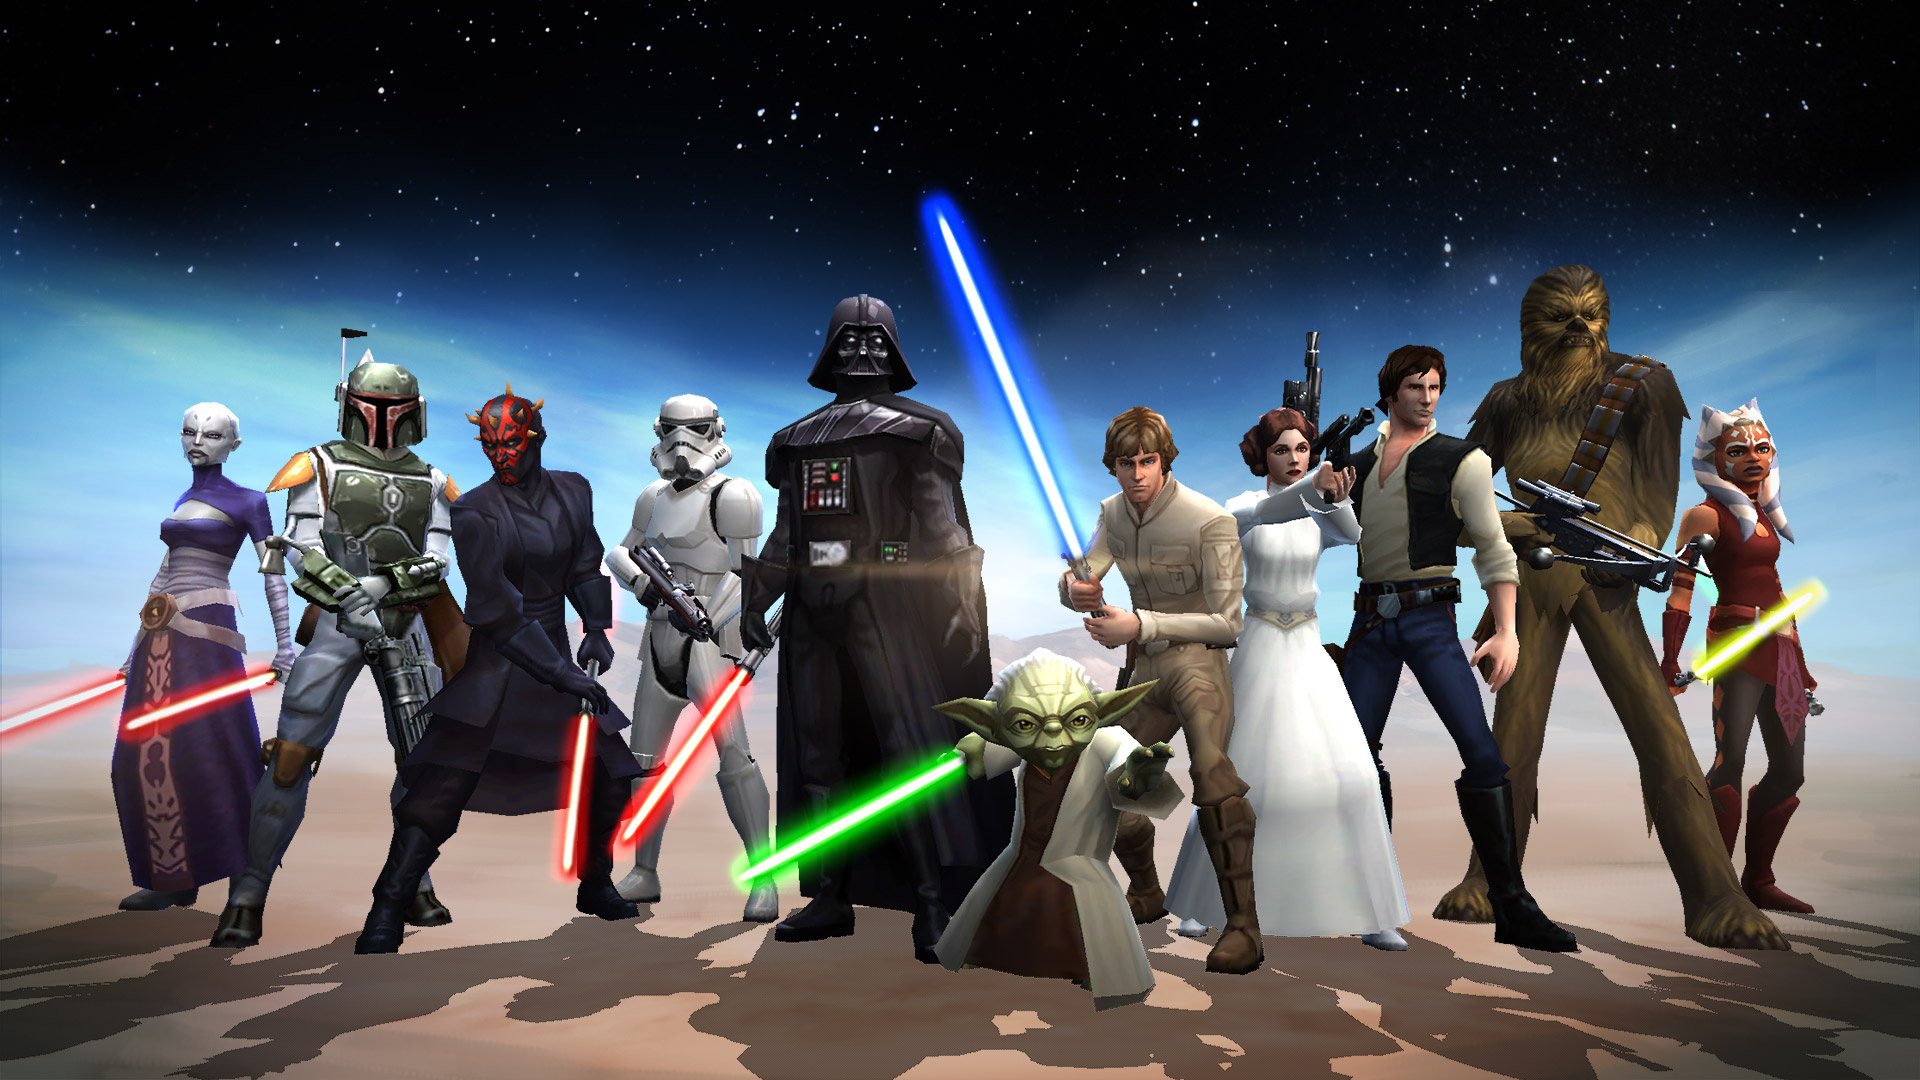 Star Wars: Galaxy of Heroes: Mobile game developed by Capital Games, Published by Electronic Arts. 1920x1080 Full HD Wallpaper.